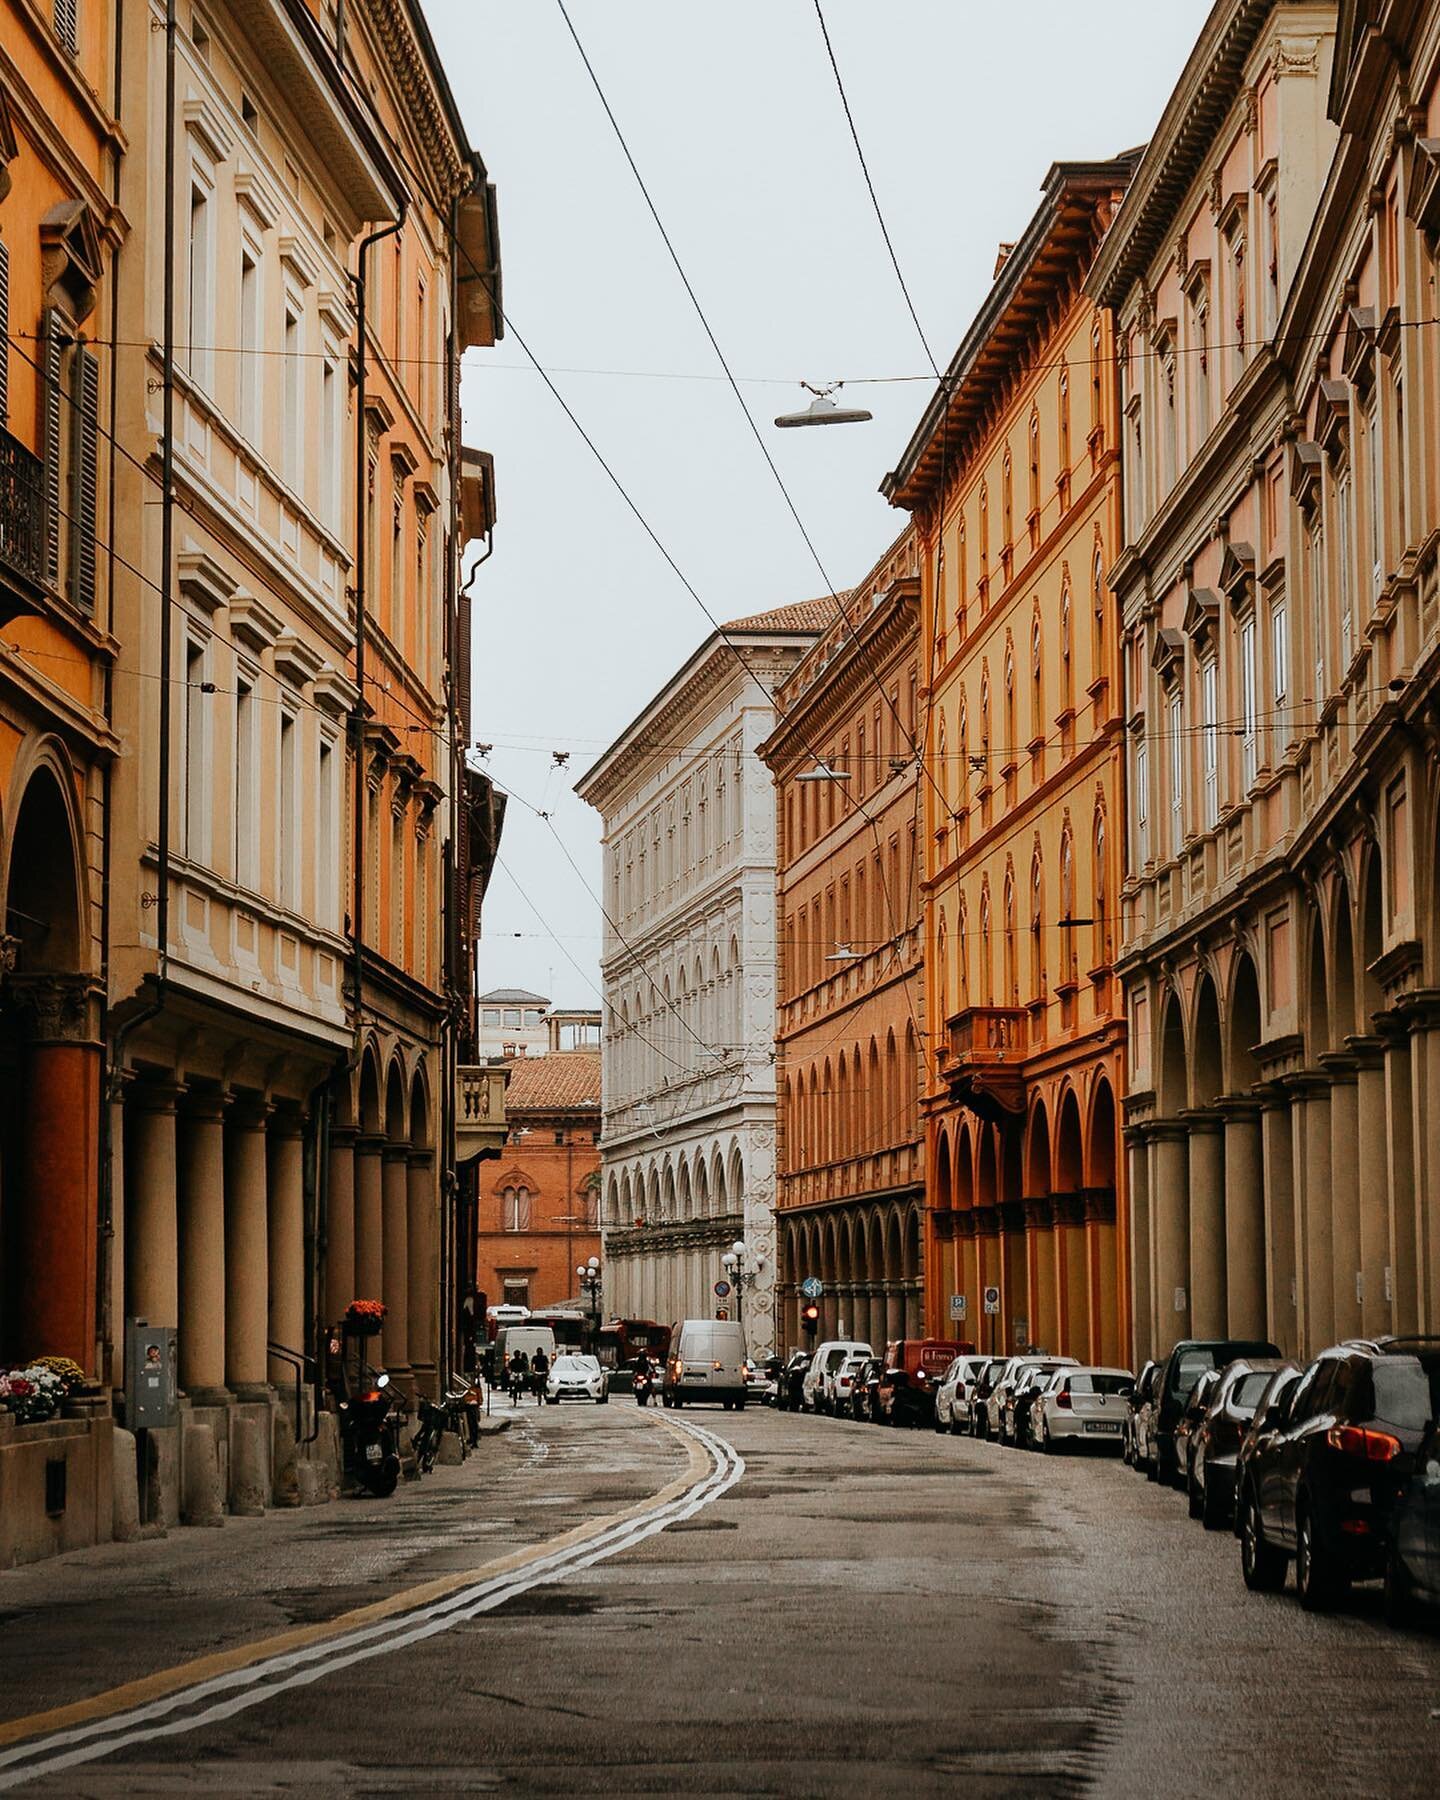 Bologna isn't like the rest of Italy.

It doesn&rsquo;t have the glimmering canals of Venice, the catwalks of Milan or artwork of Florence, and it certainly doesn&rsquo;t have the colosseum that beckons tourists to Rome.

But what Bologna does have i